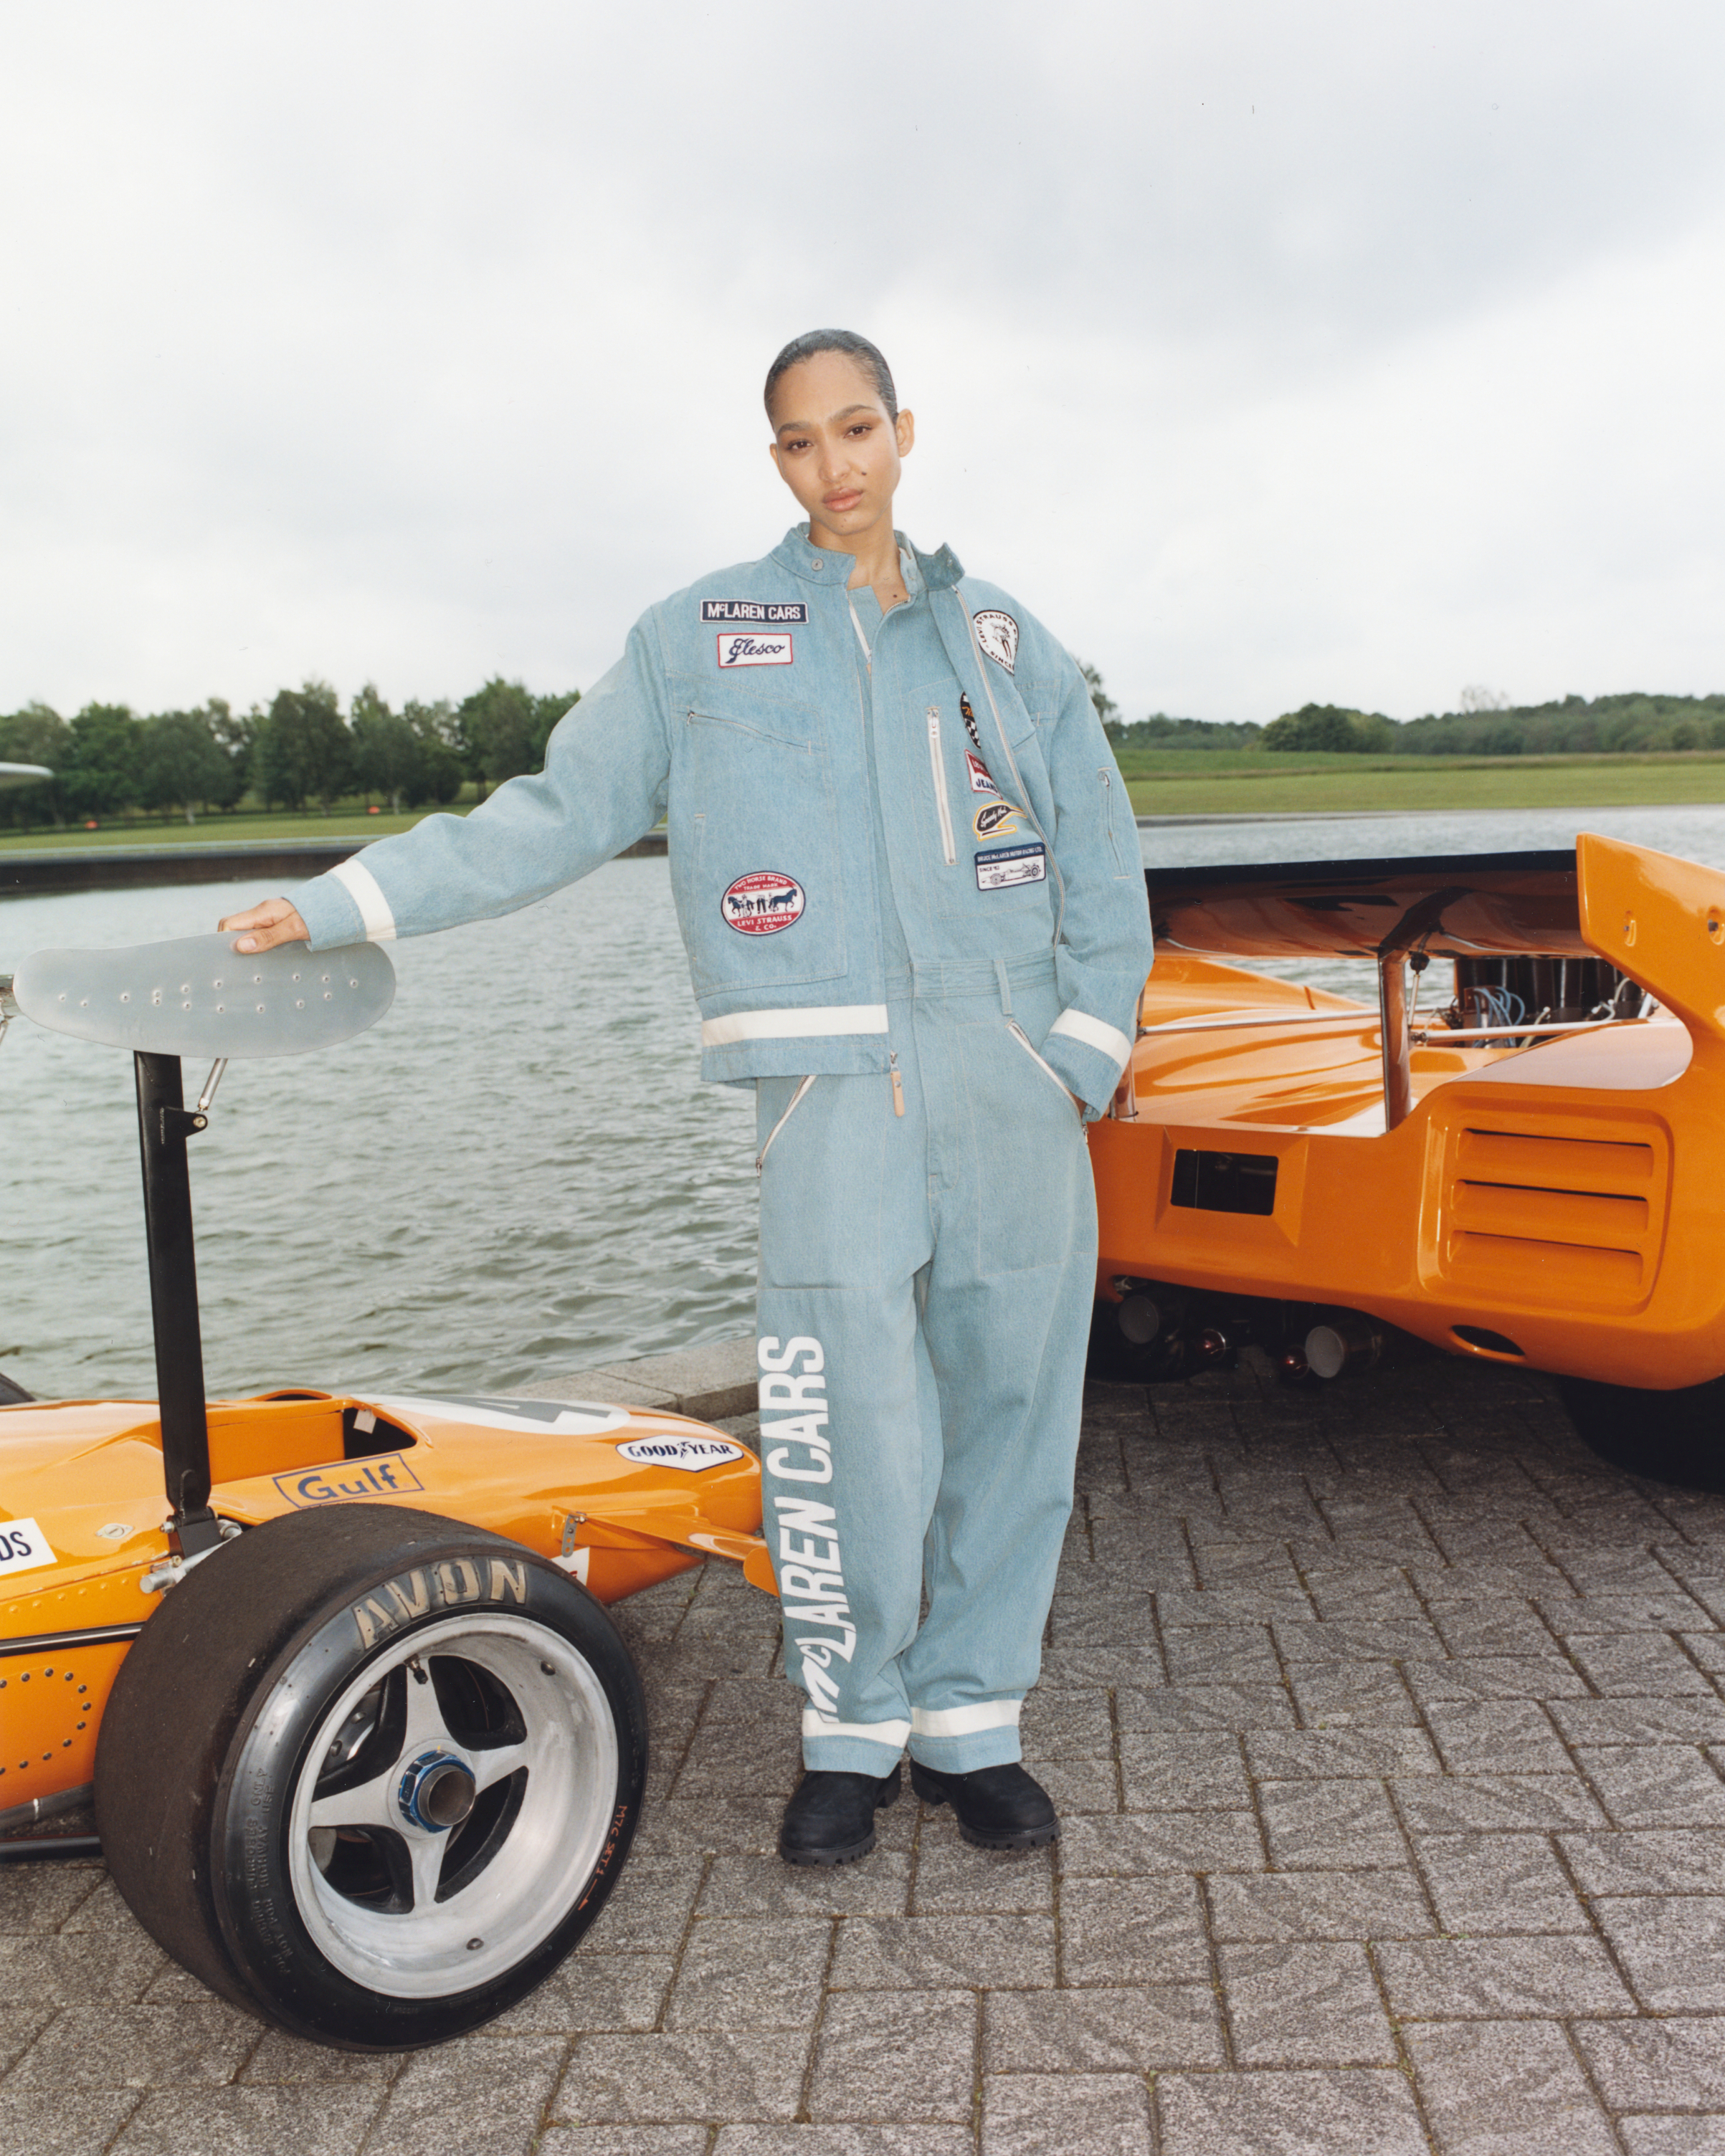 Model in a denim jumpsuit stands beside an orange race car near water. The jumpsuit is adorned with various patches. Trees are visible in the background